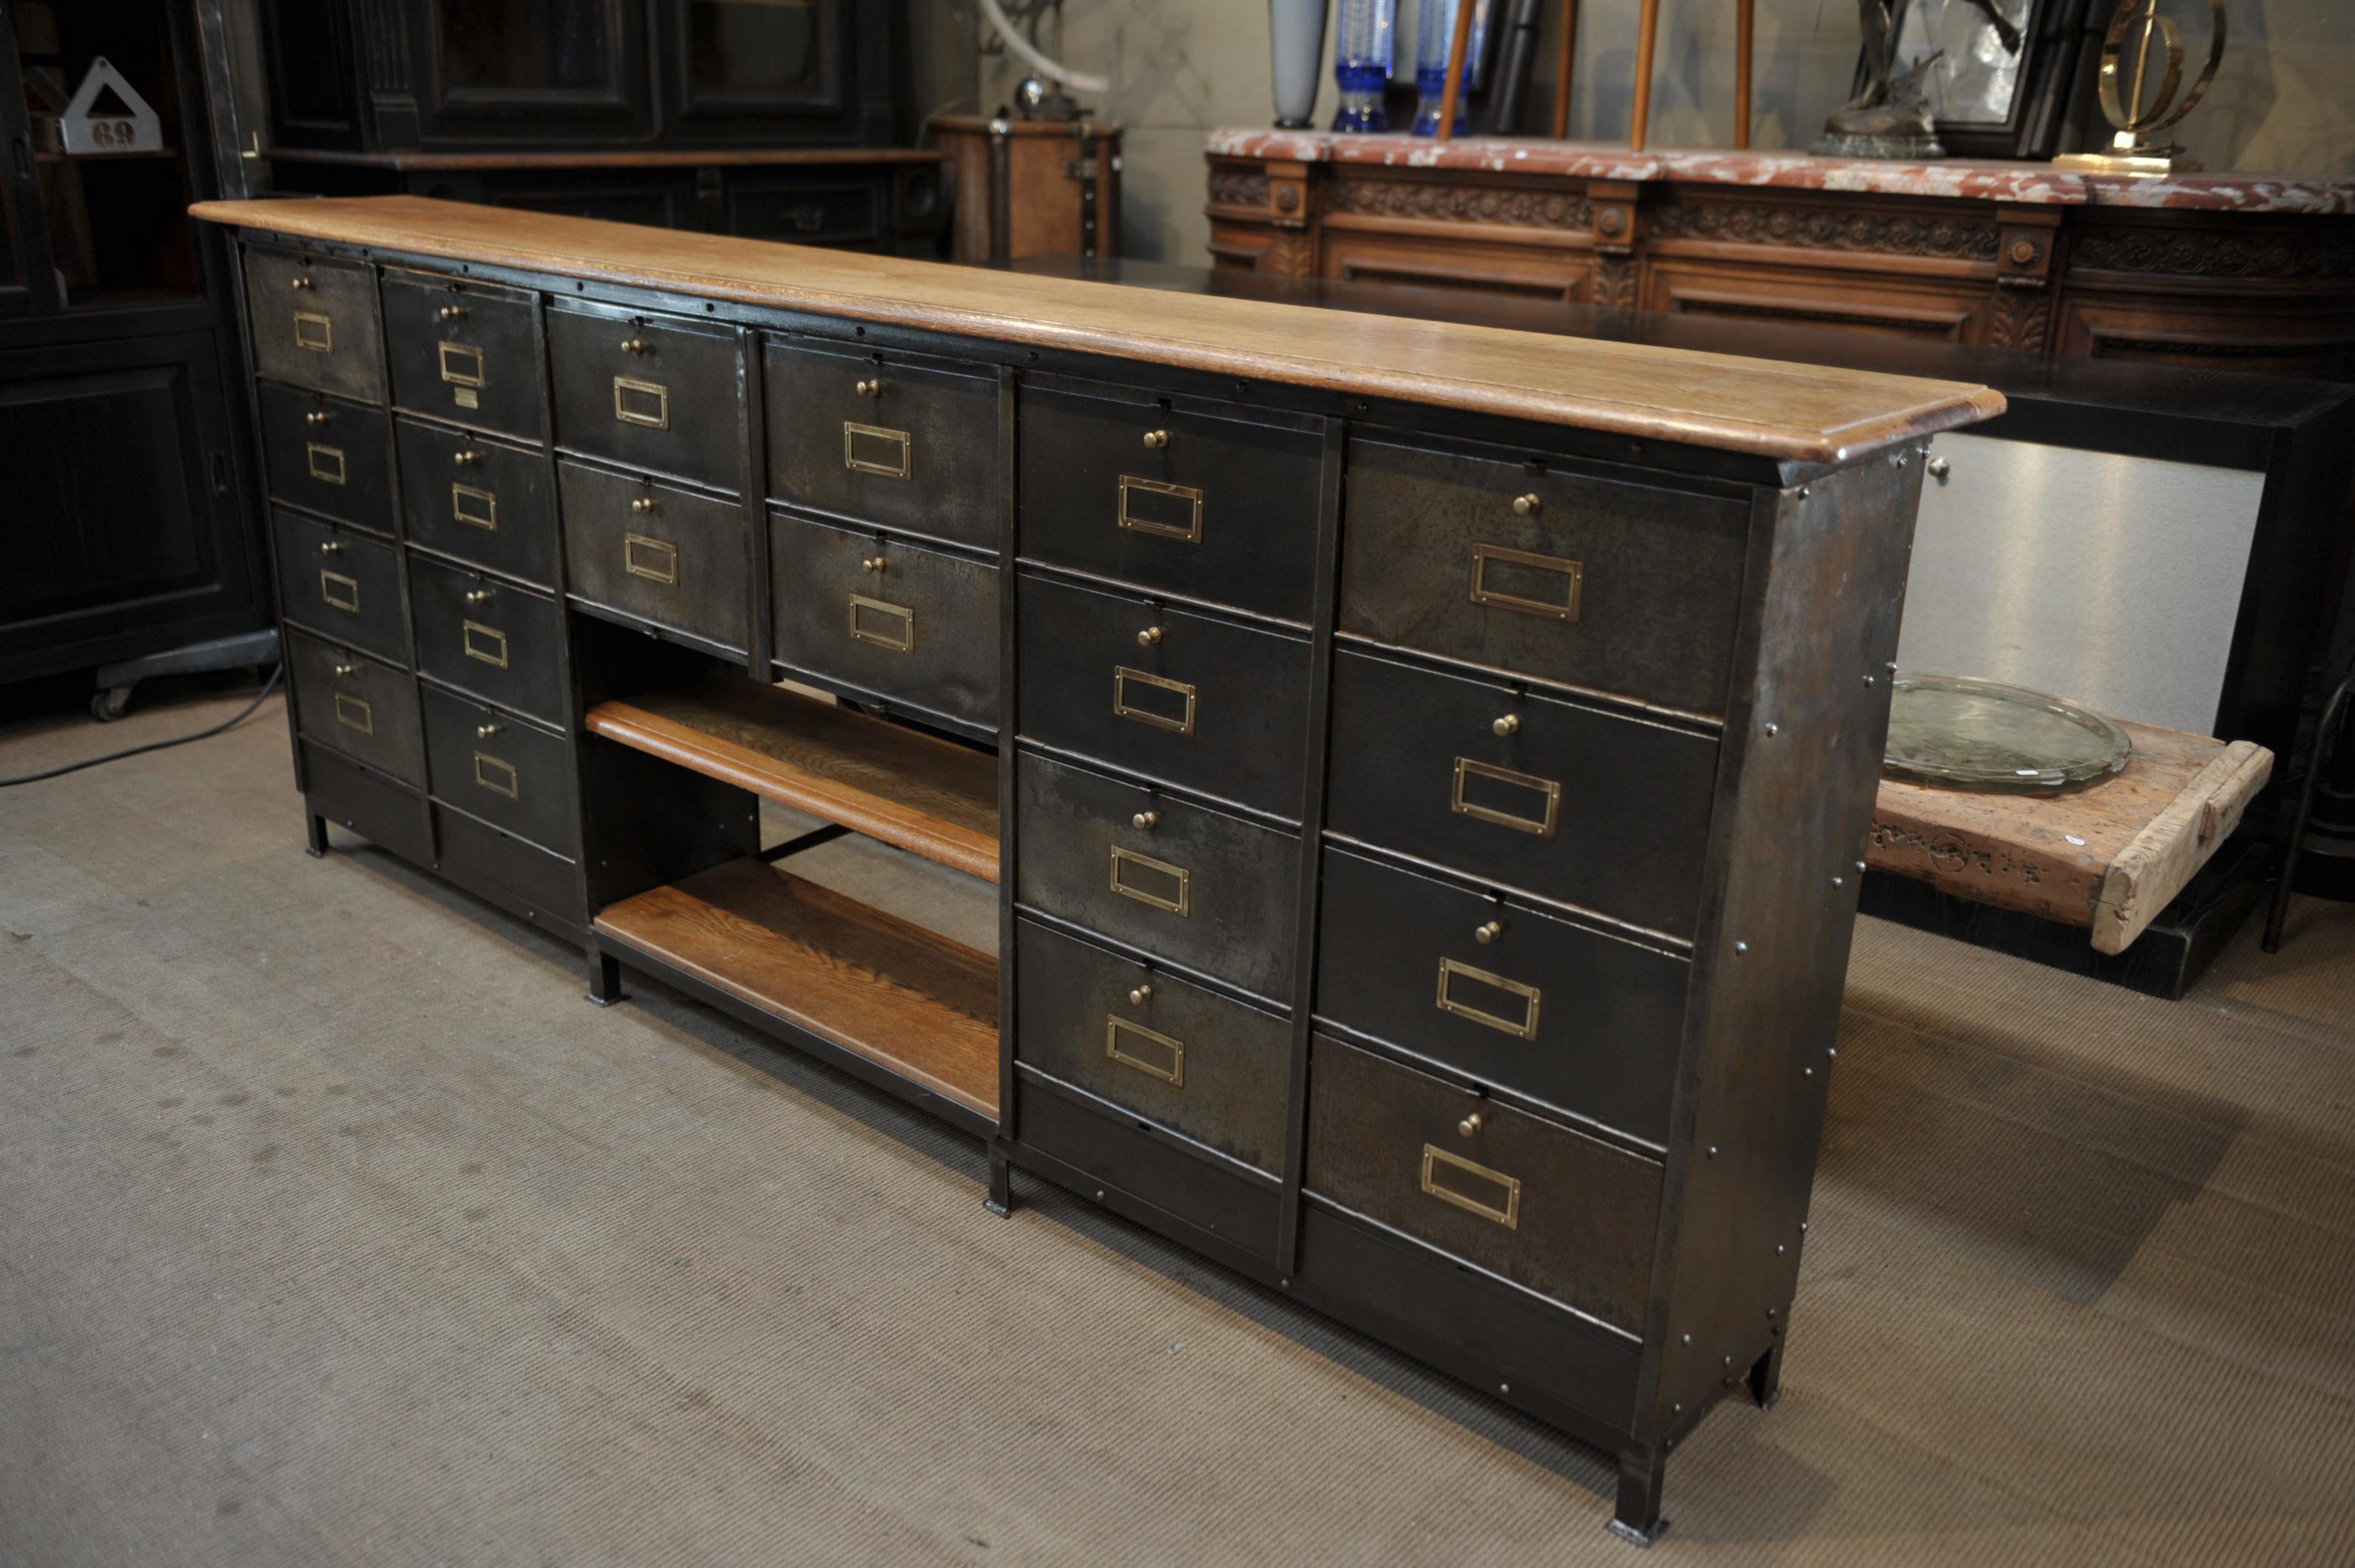 Long Ronéo 20 Capets doors circa 1950, solid oak top and shelves all hand polished finish, brass 